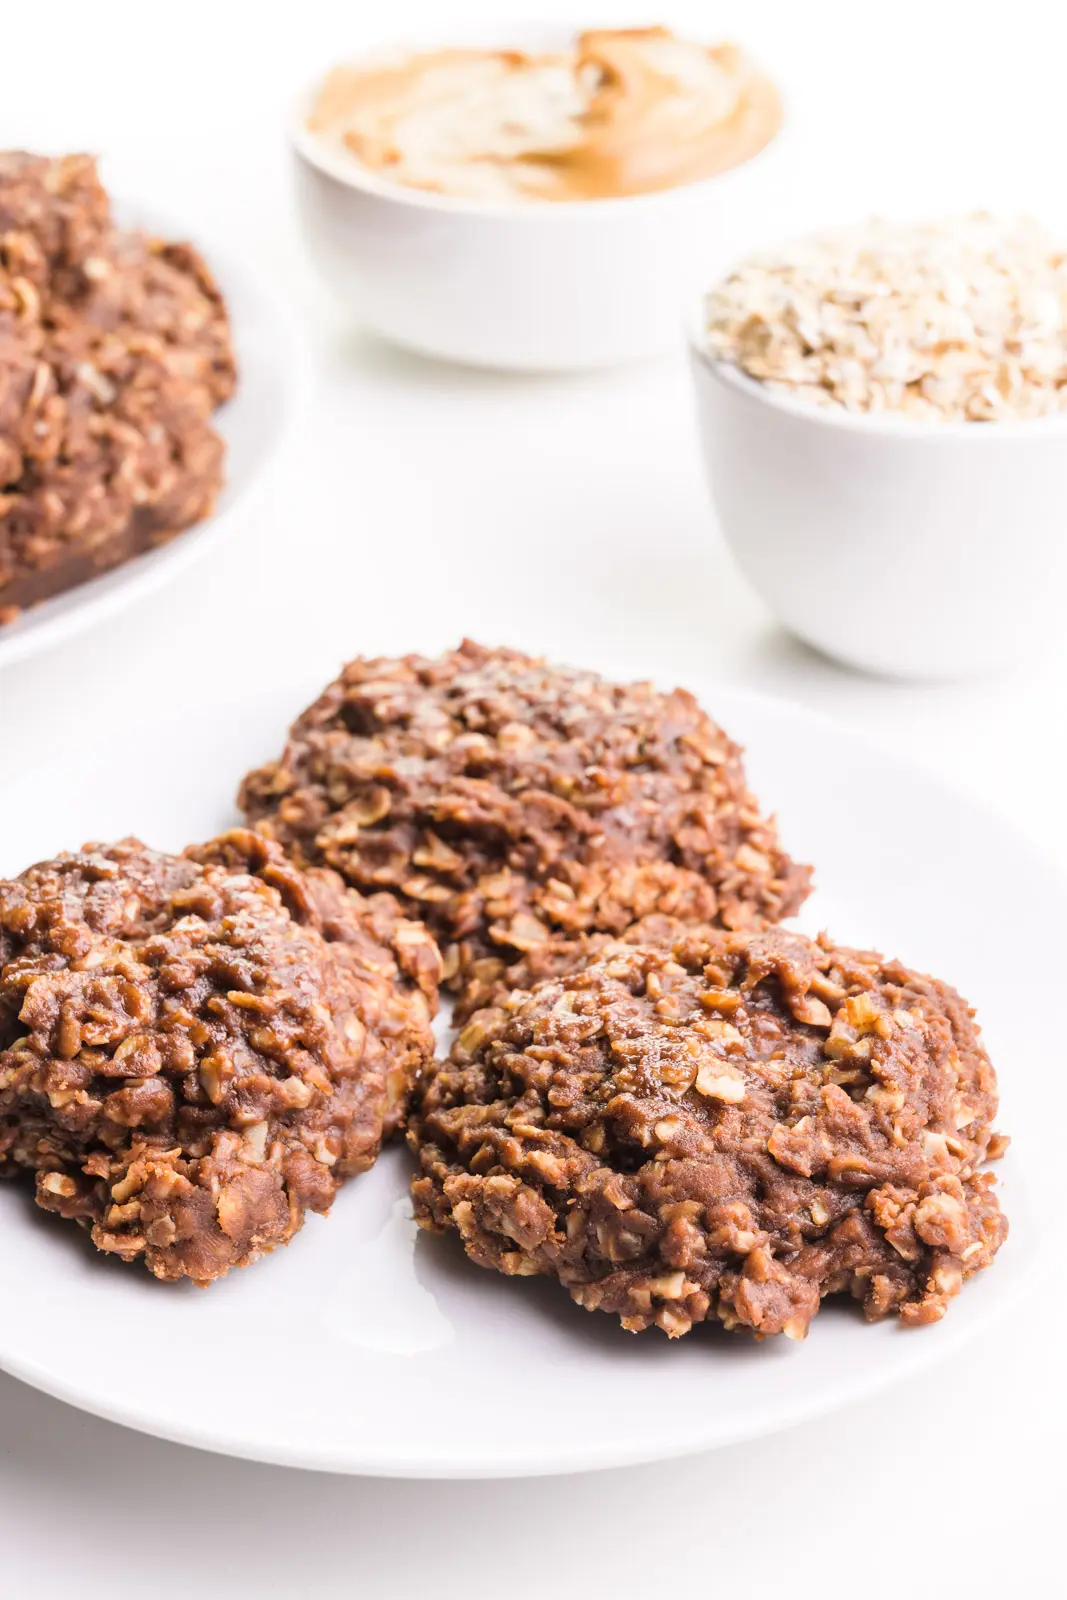 Three chocolate no-bake cookies are on a plate. There's a bowl of oats, a bowl of peanut butter, and a plate with more cookies in the background.